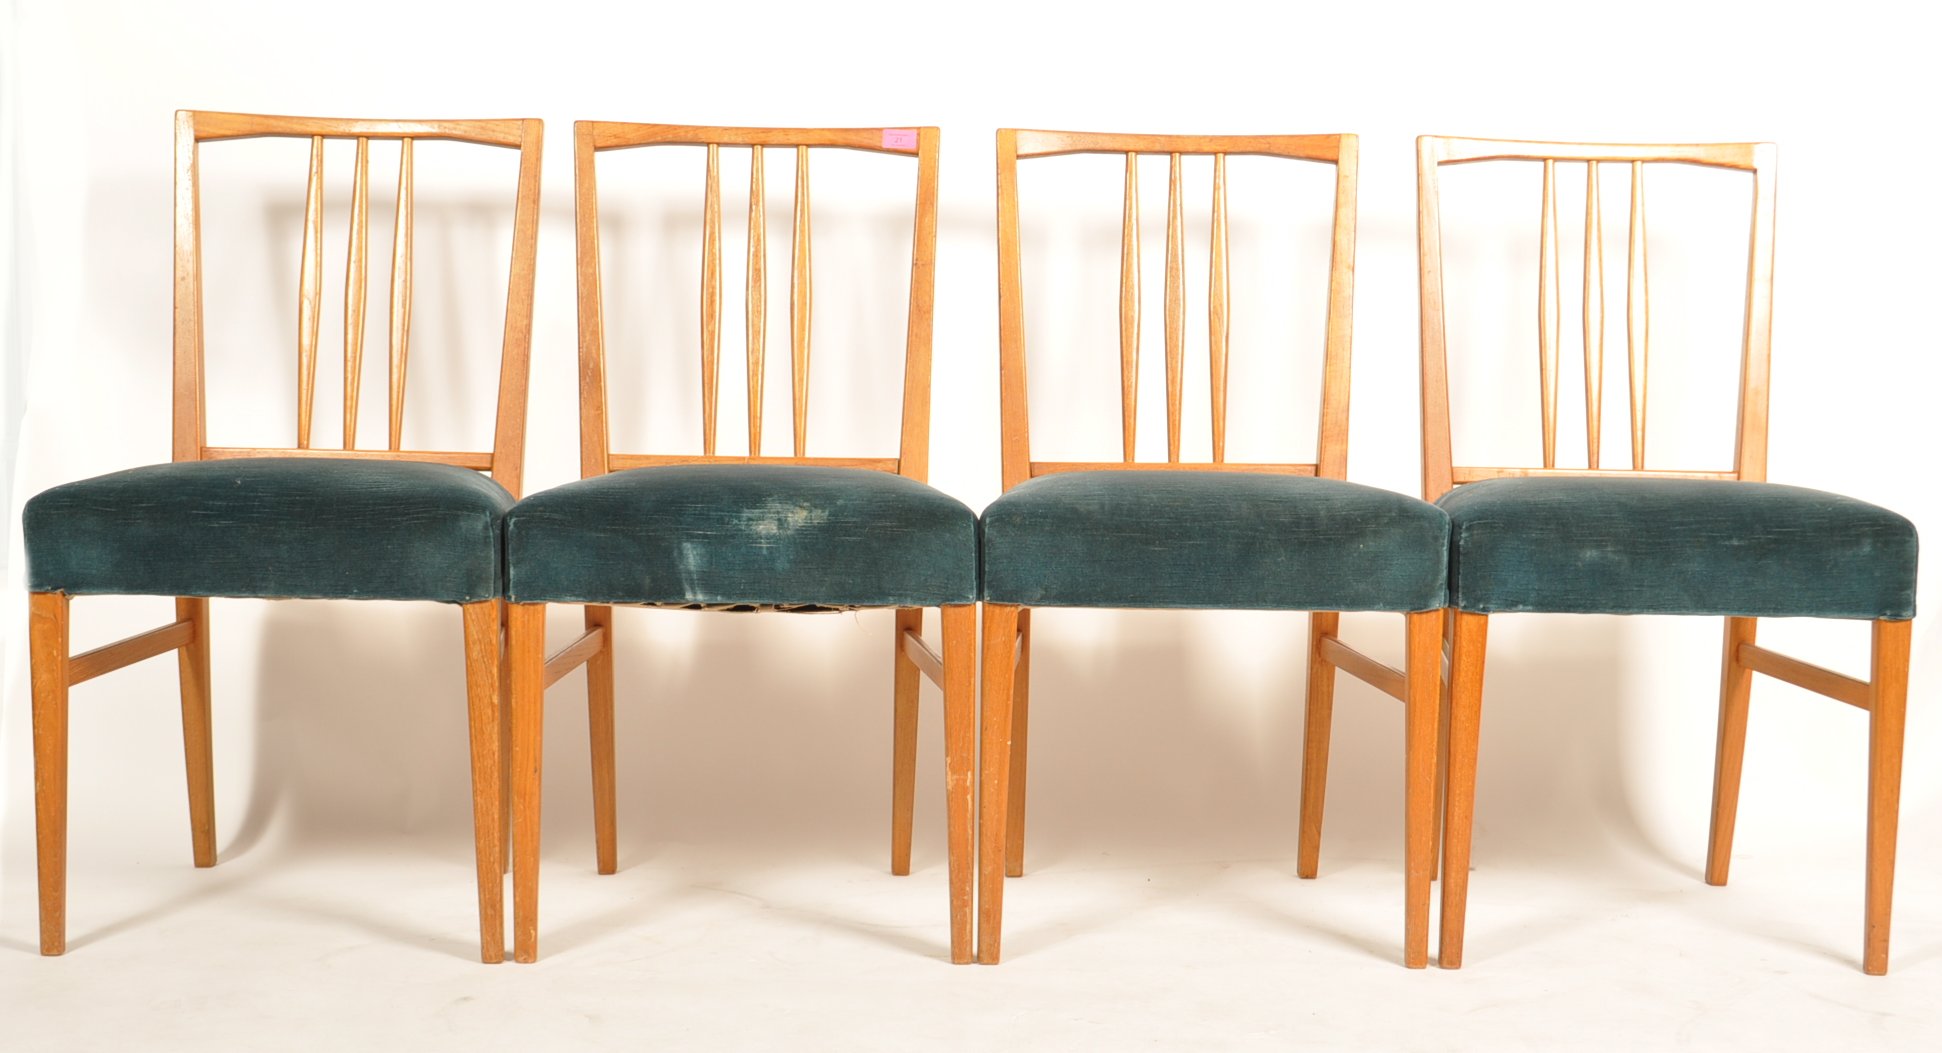 Gordon Russell Of Broadway - A set of 4 mid 20th Century beech wood spindle back dining chairs and